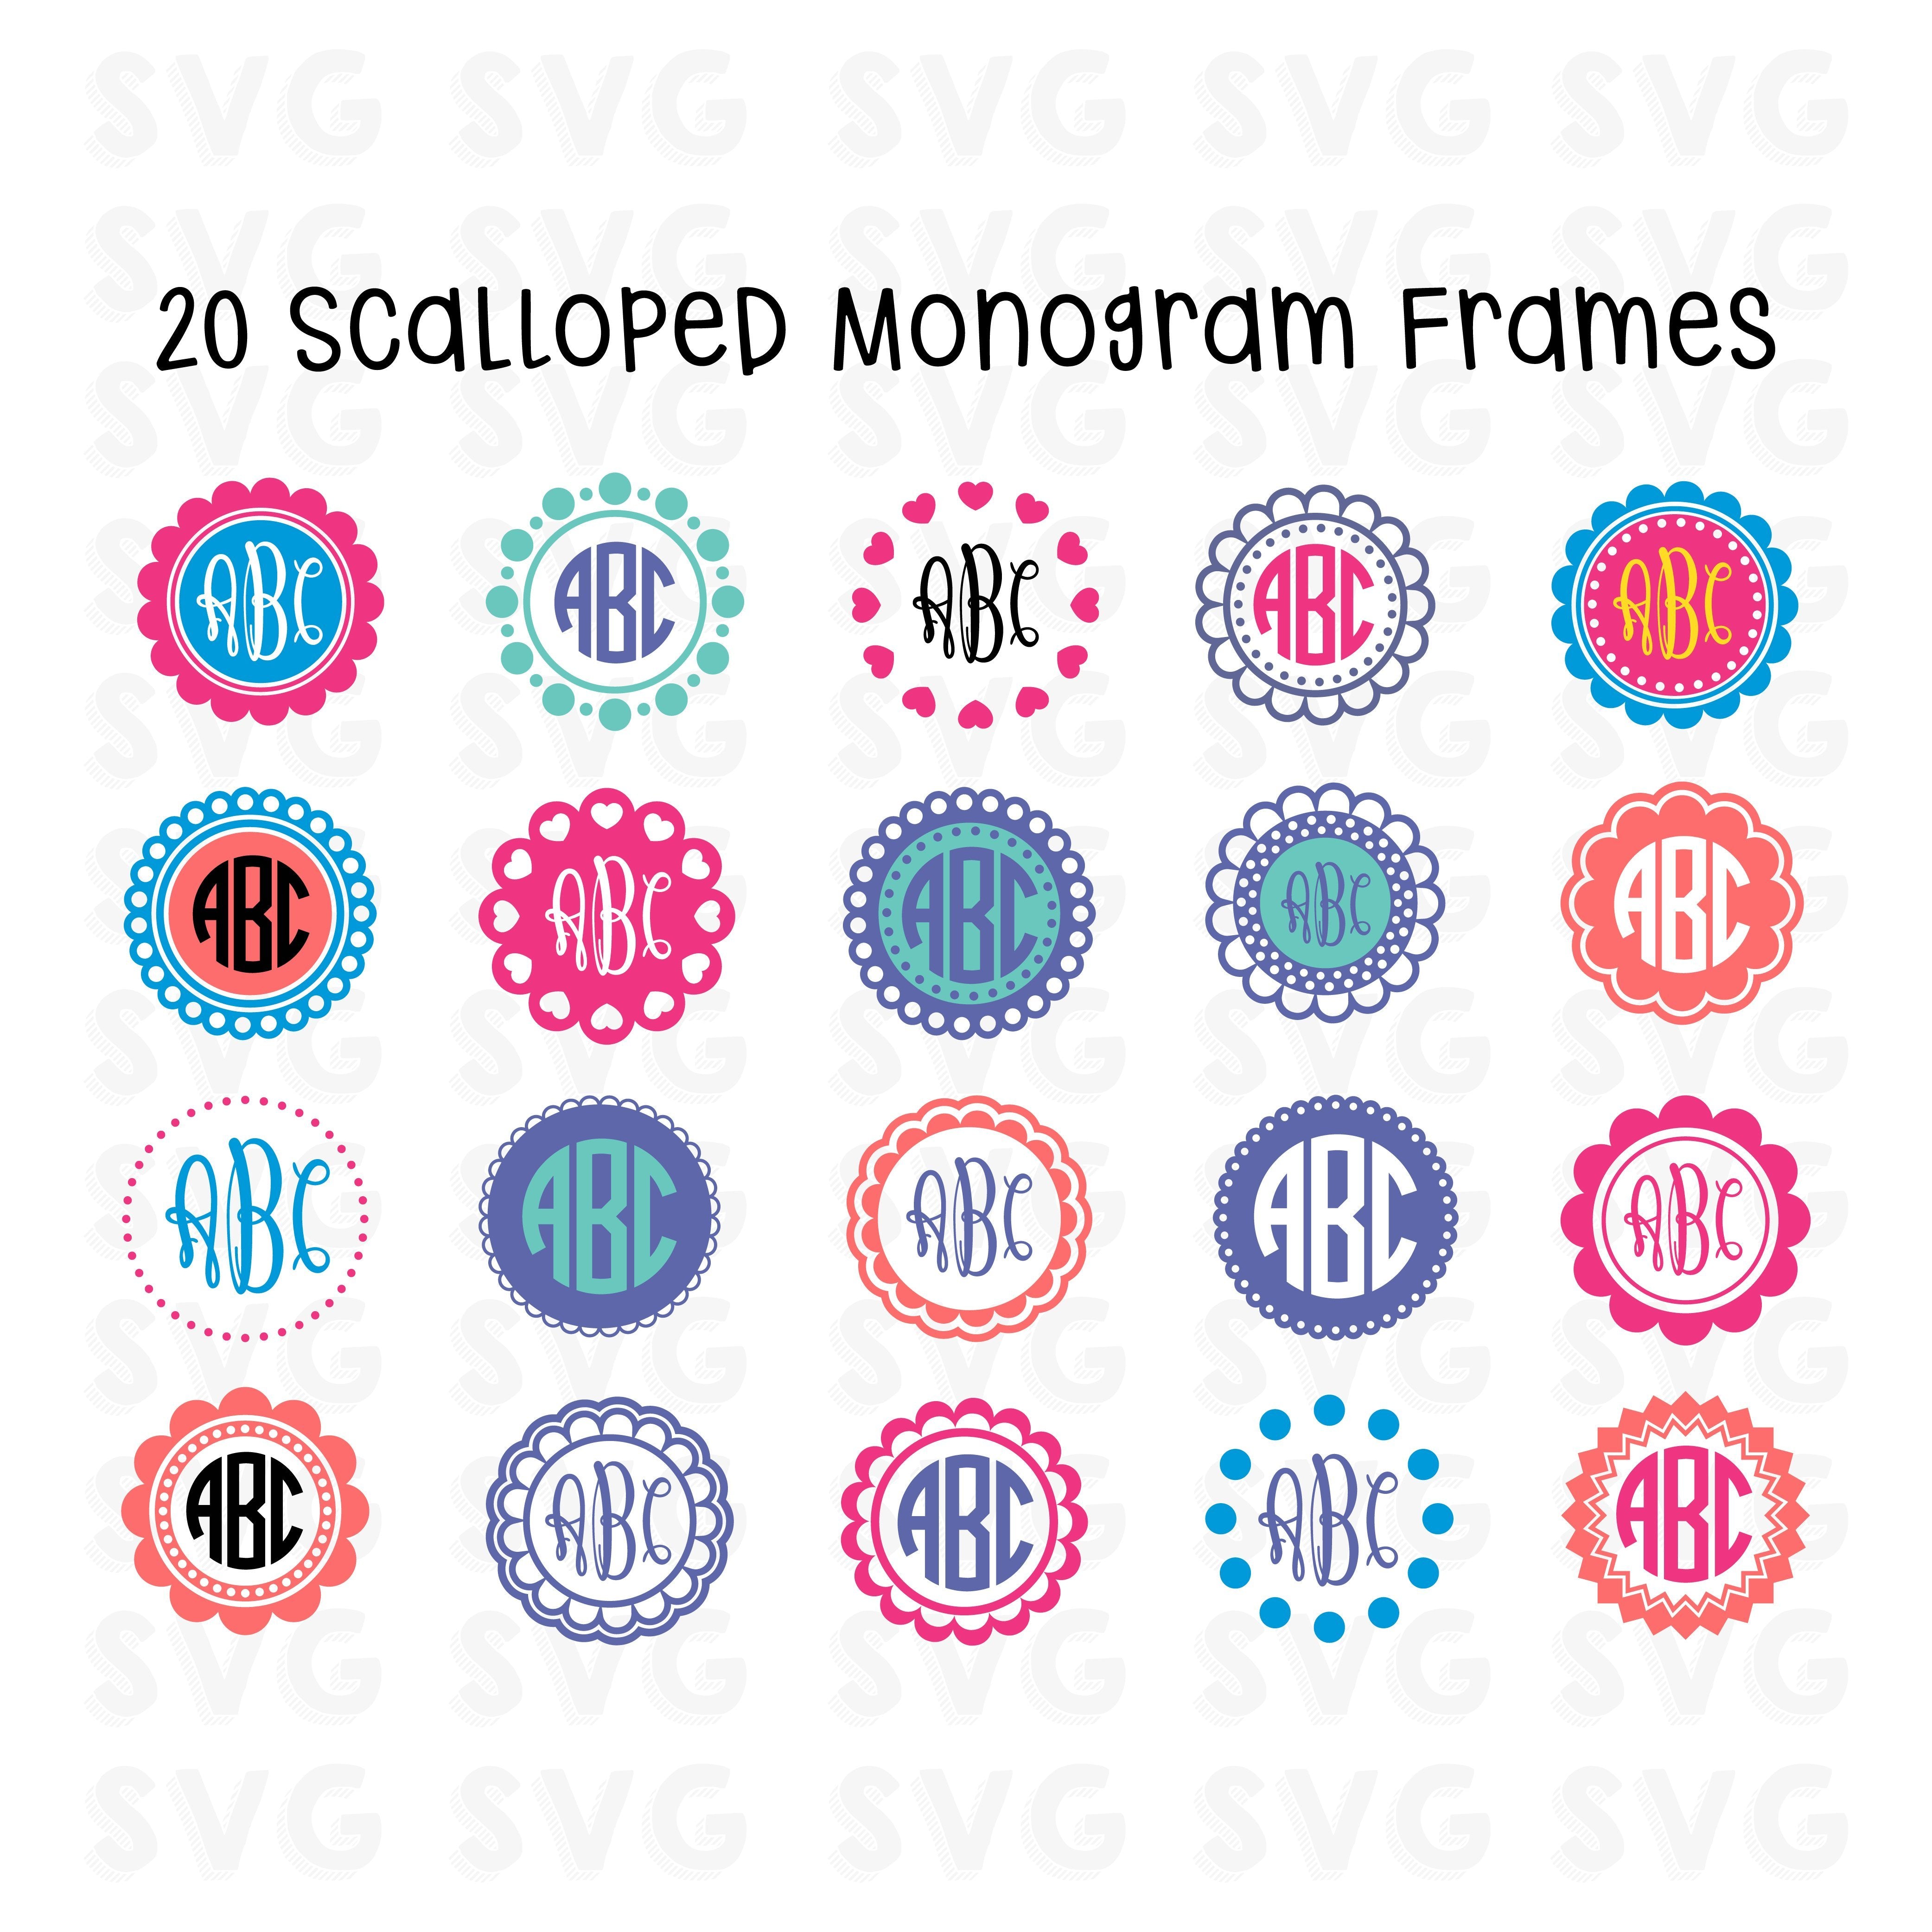 Download Scalloped Monogram Frame Svg Eps Dxf Png Circle Monograms Cut Files For Silhouette Studio Cricut Explore Vinyl Cutters Circle Frame So Fontsy